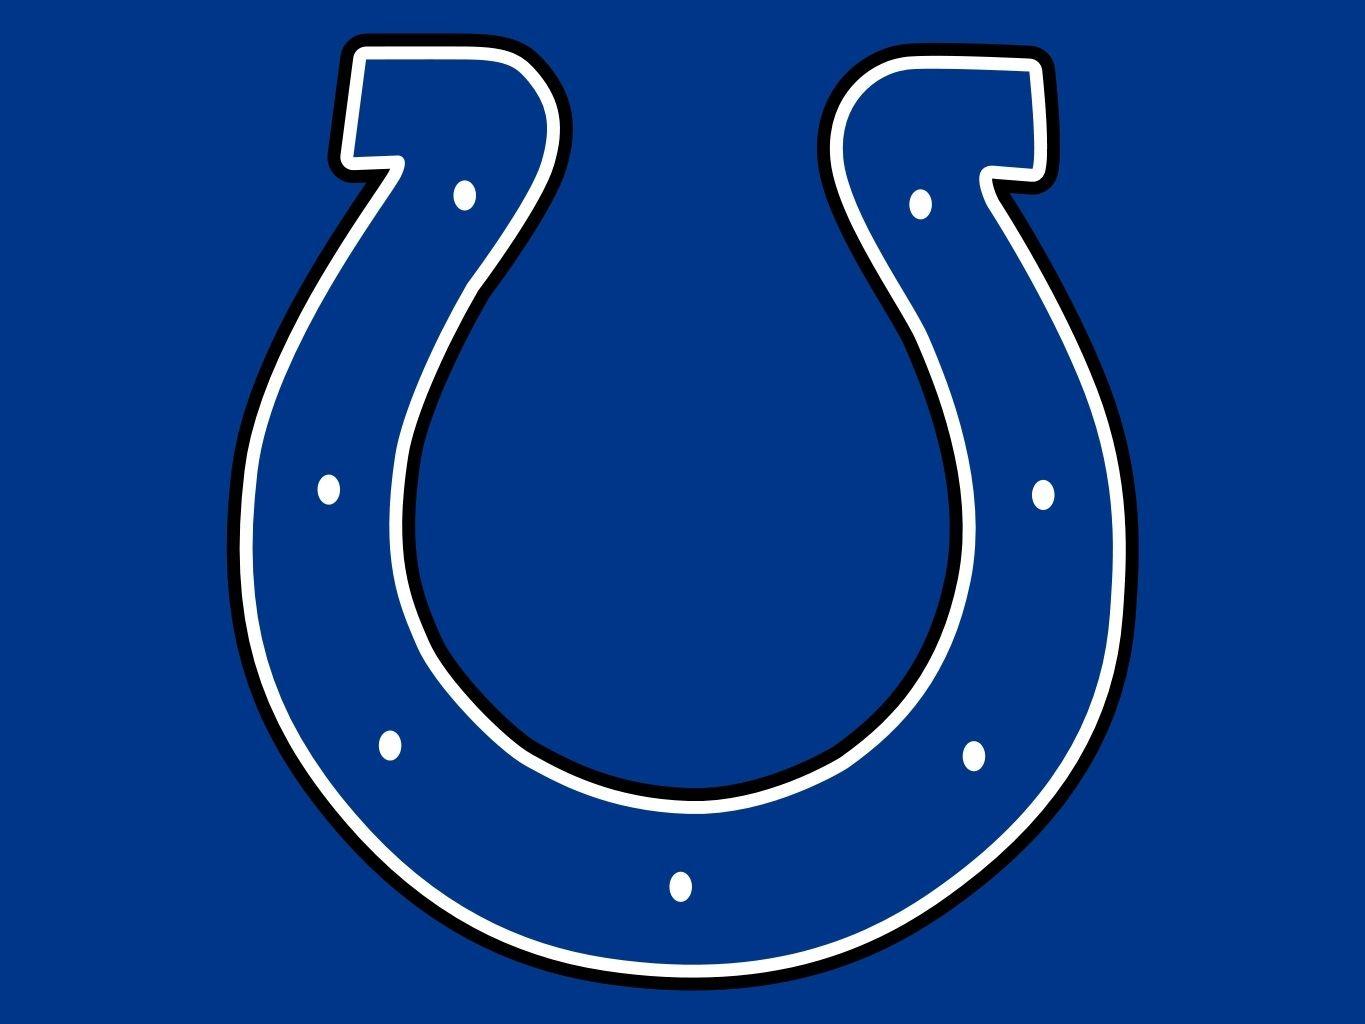 NFL Colts Logo - 2017 NFL Season Preview- Indianapolis Colts | HubPages